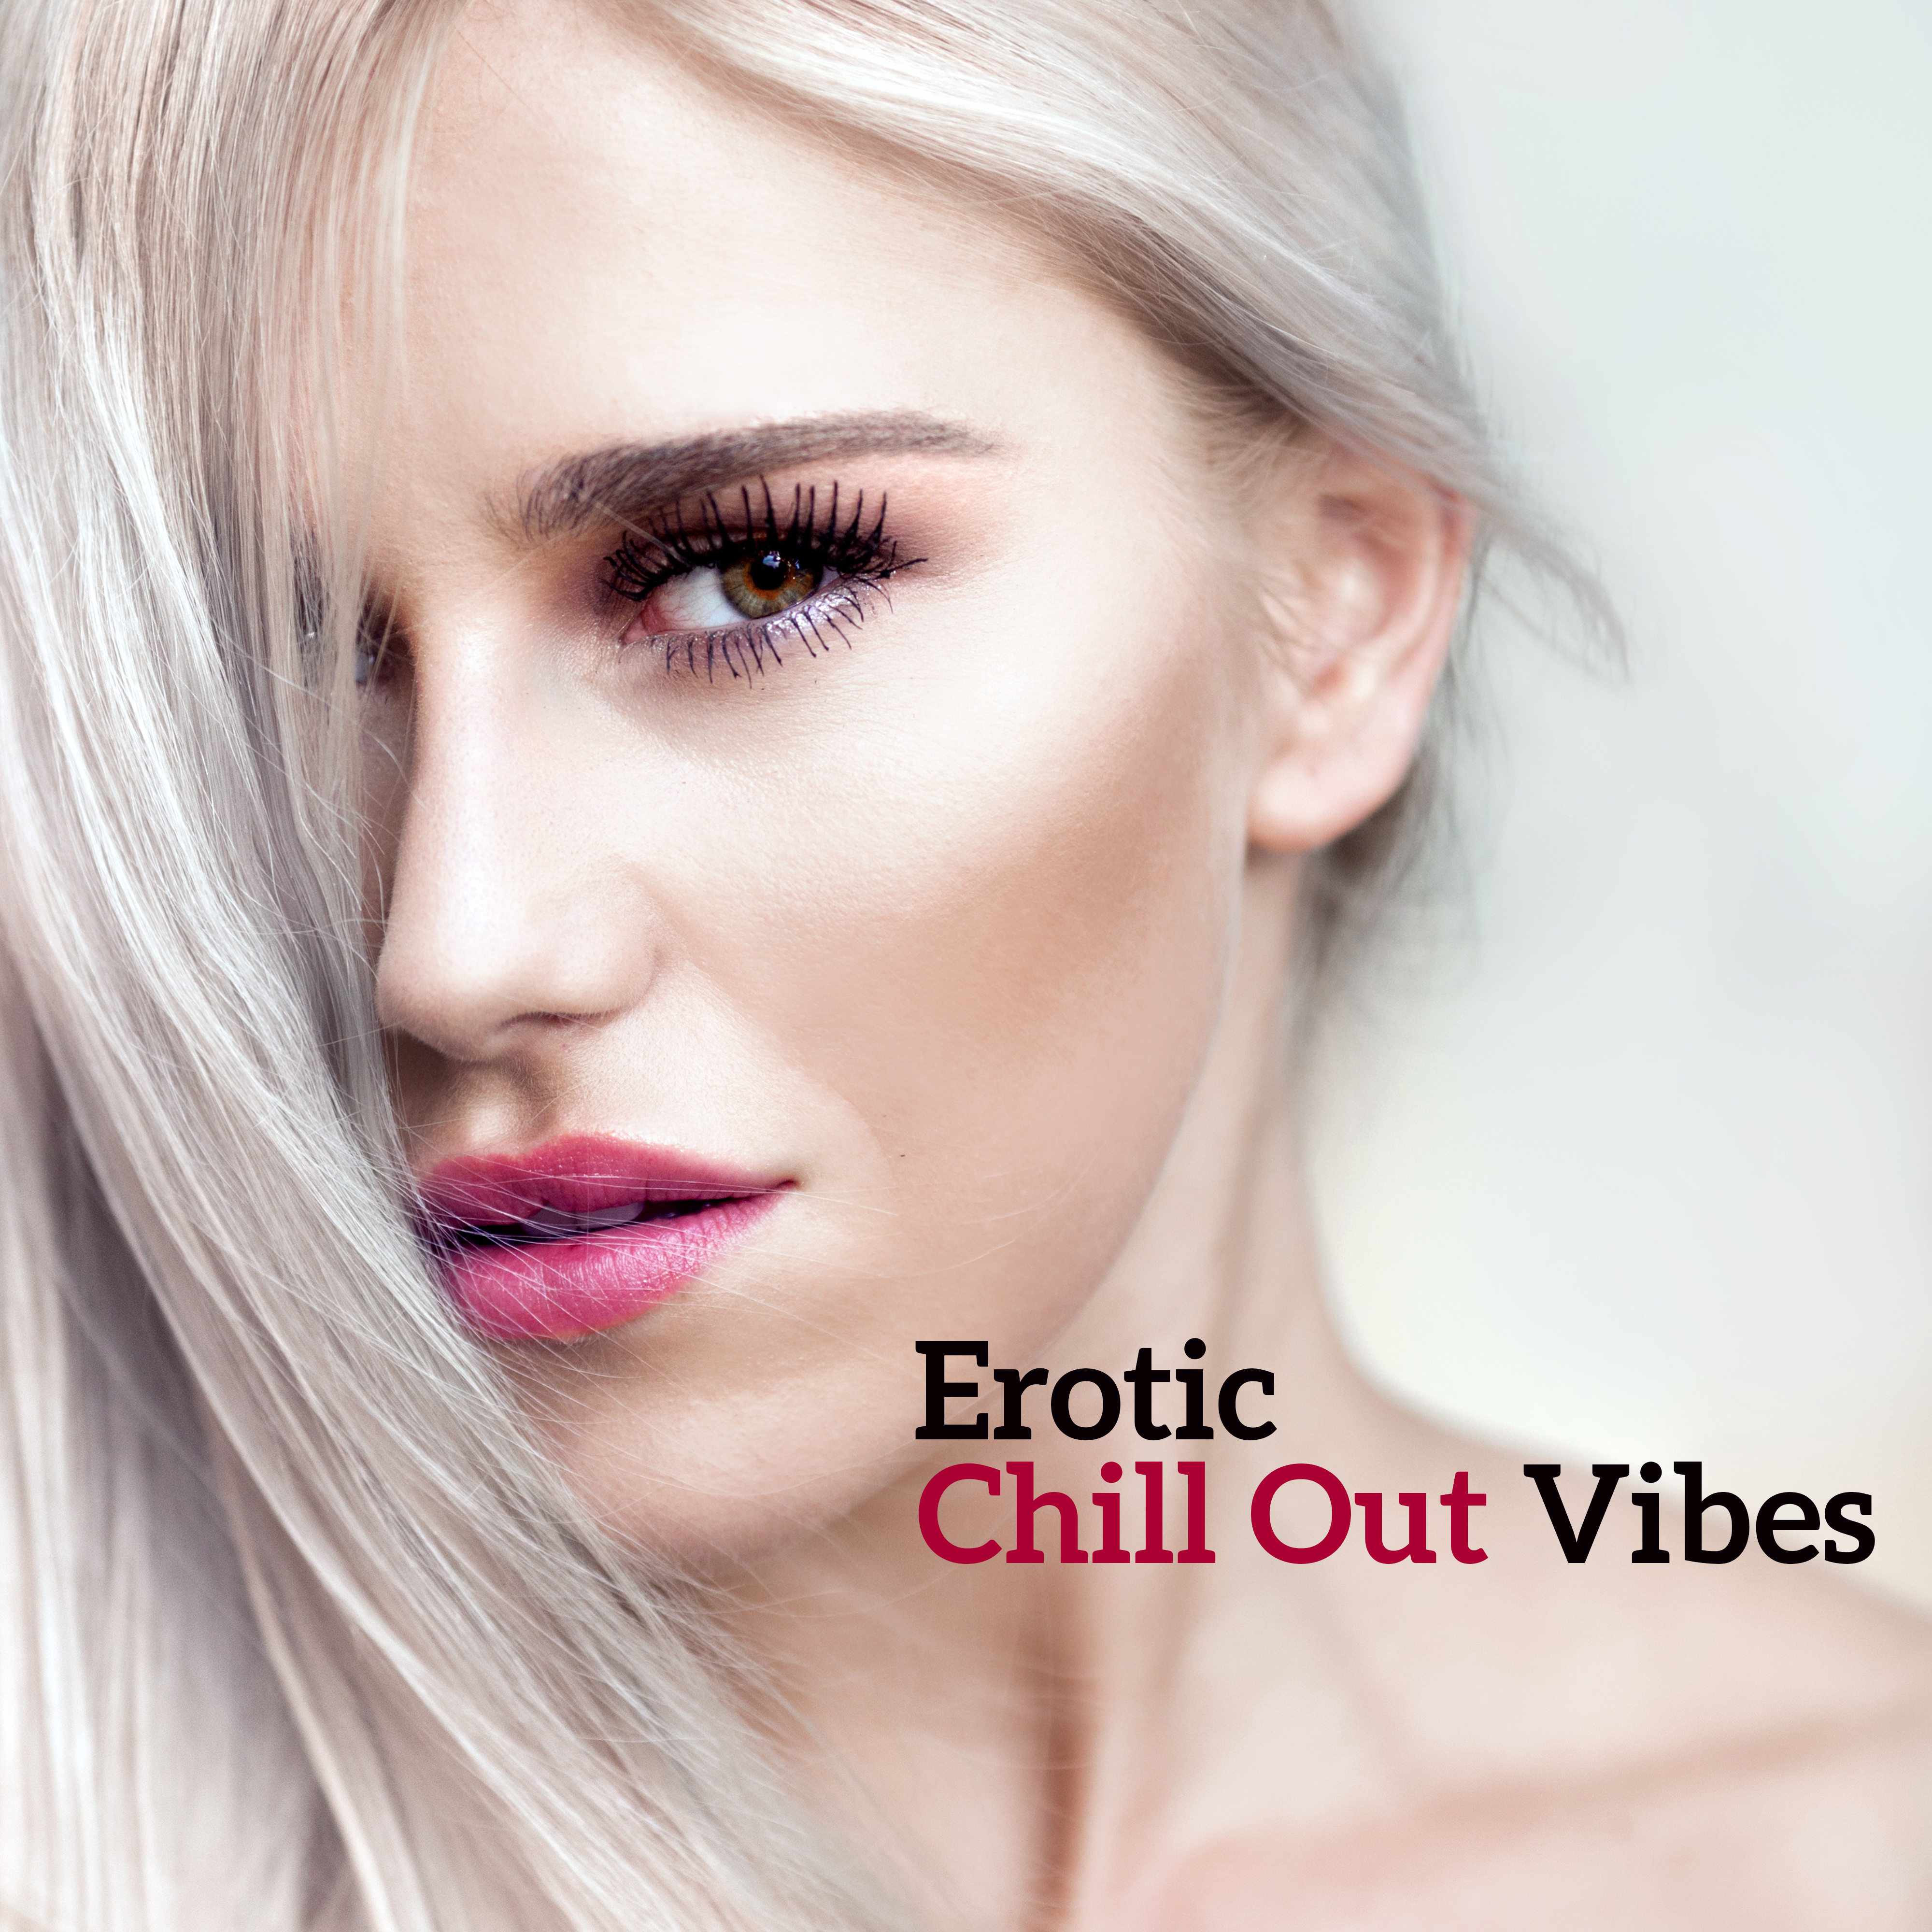 Erotic Chill Out Vibes  Hot Summer Vibes, Melodies for Lovers, Sensual Chill Out Music